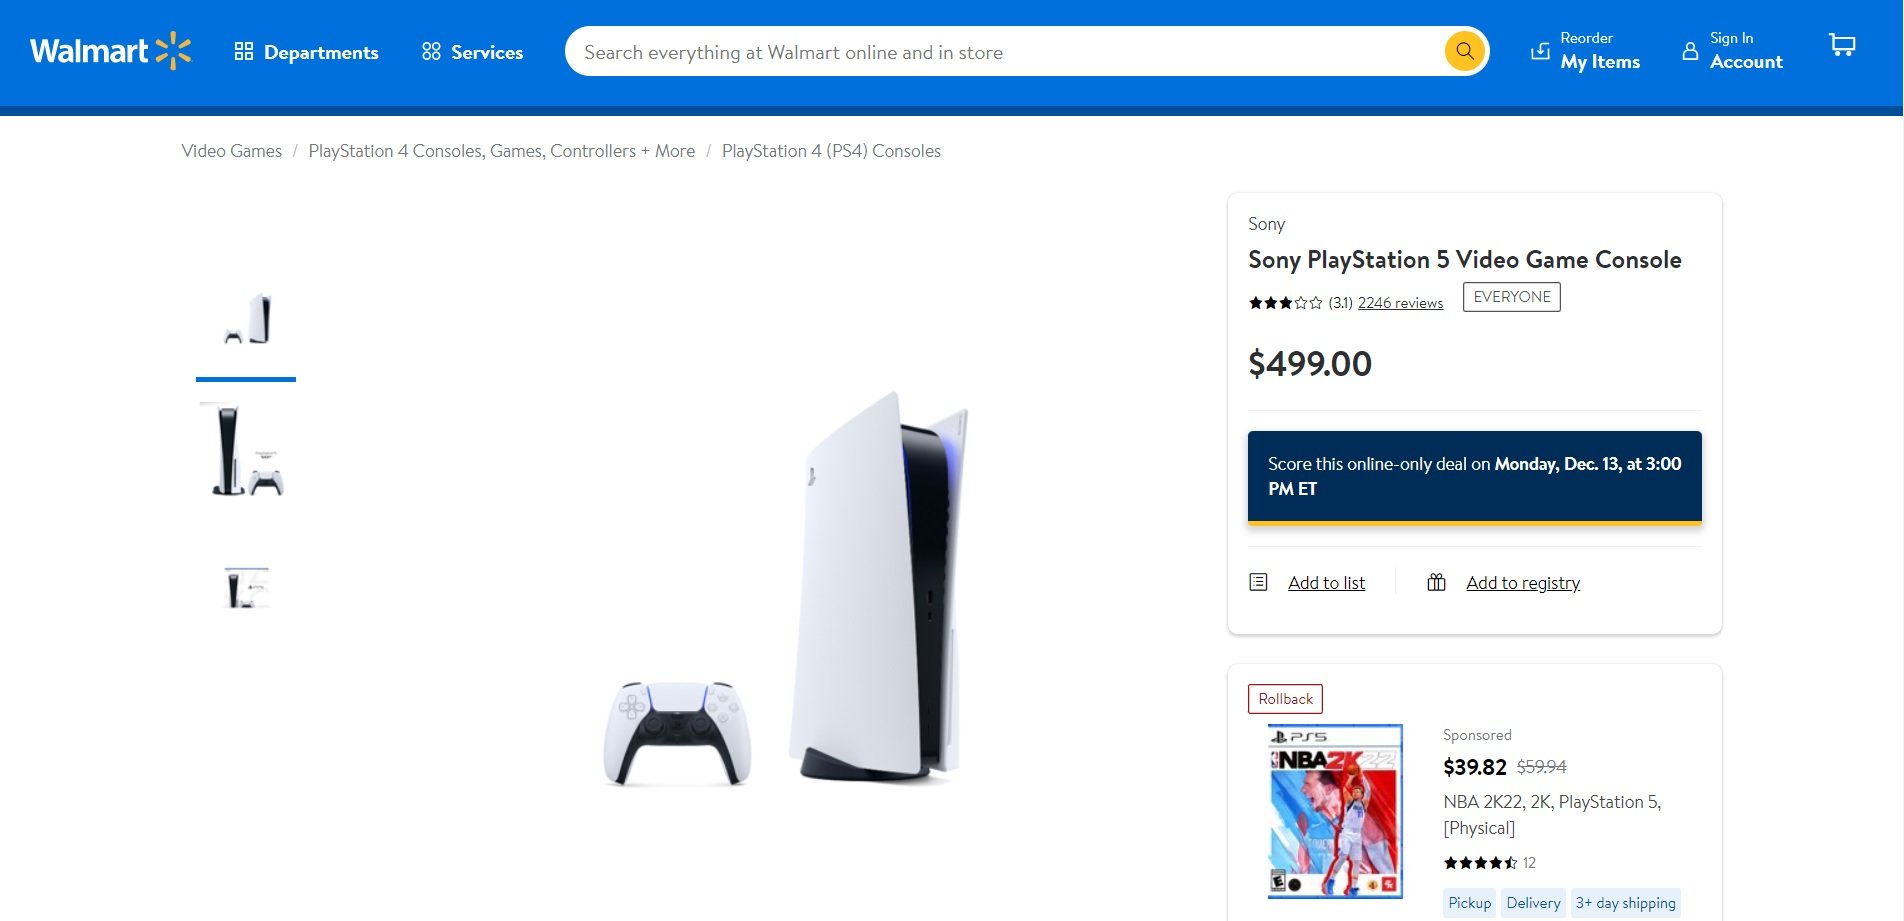 Walmart has the PS5 in stock right now and anyone can buy it